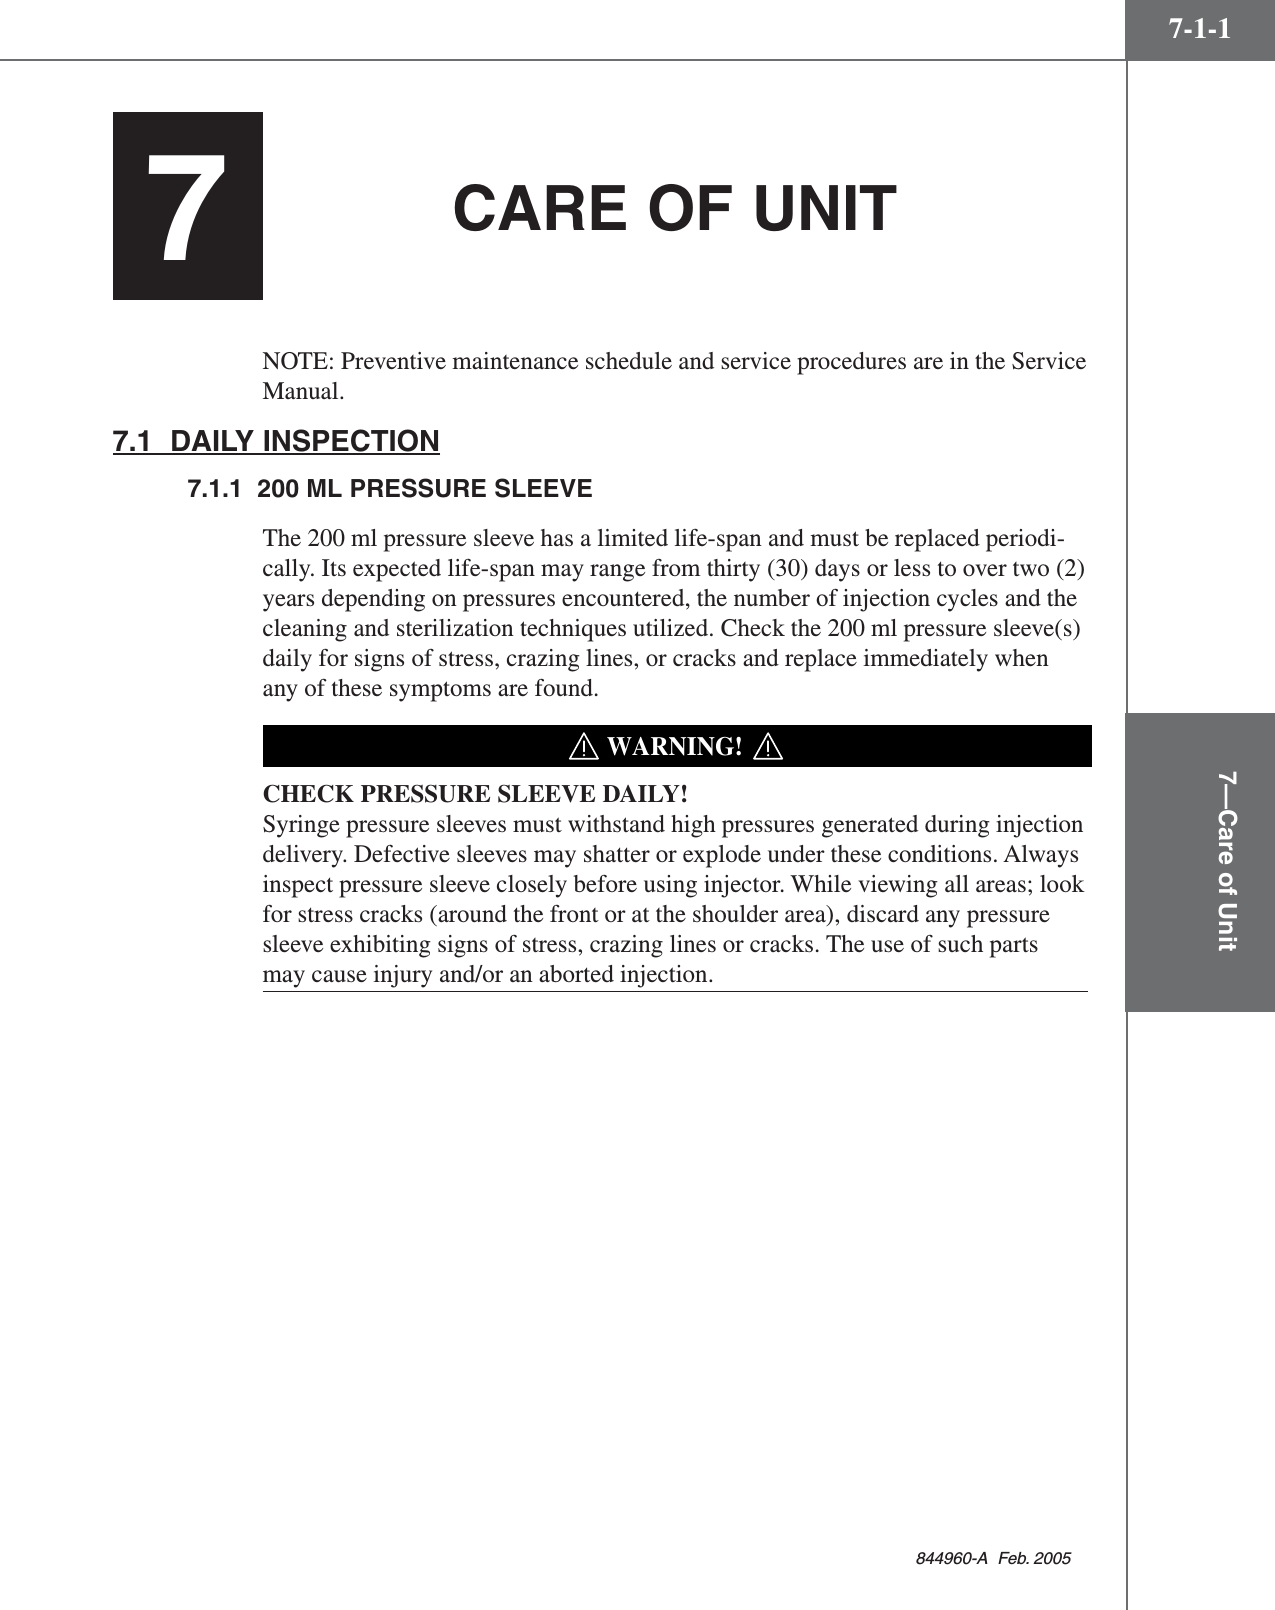 7—Care of Unit7-1-1844960-A  Feb. 2005CARE OF UNITNOTE: Preventive maintenance schedule and service procedures are in the ServiceManual.7.1  DAILY INSPECTION7.1.1  200 ML PRESSURE SLEEVEThe 200 ml pressure sleeve has a limited life-span and must be replaced periodi-cally. Its expected life-span may range from thirty (30) days or less to over two (2)years depending on pressures encountered, the number of injection cycles and thecleaning and sterilization techniques utilized. Check the 200 ml pressure sleeve(s)daily for signs of stress, crazing lines, or cracks and replace immediately whenany of these symptoms are found.WARNING!CHECK PRESSURE SLEEVE DAILY!Syringe pressure sleeves must withstand high pressures generated during injectiondelivery. Defective sleeves may shatter or explode under these conditions. Alwaysinspect pressure sleeve closely before using injector. While viewing all areas; lookfor stress cracks (around the front or at the shoulder area), discard any pressuresleeve exhibiting signs of stress, crazing lines or cracks. The use of such partsmay cause injury and/or an aborted injection.7